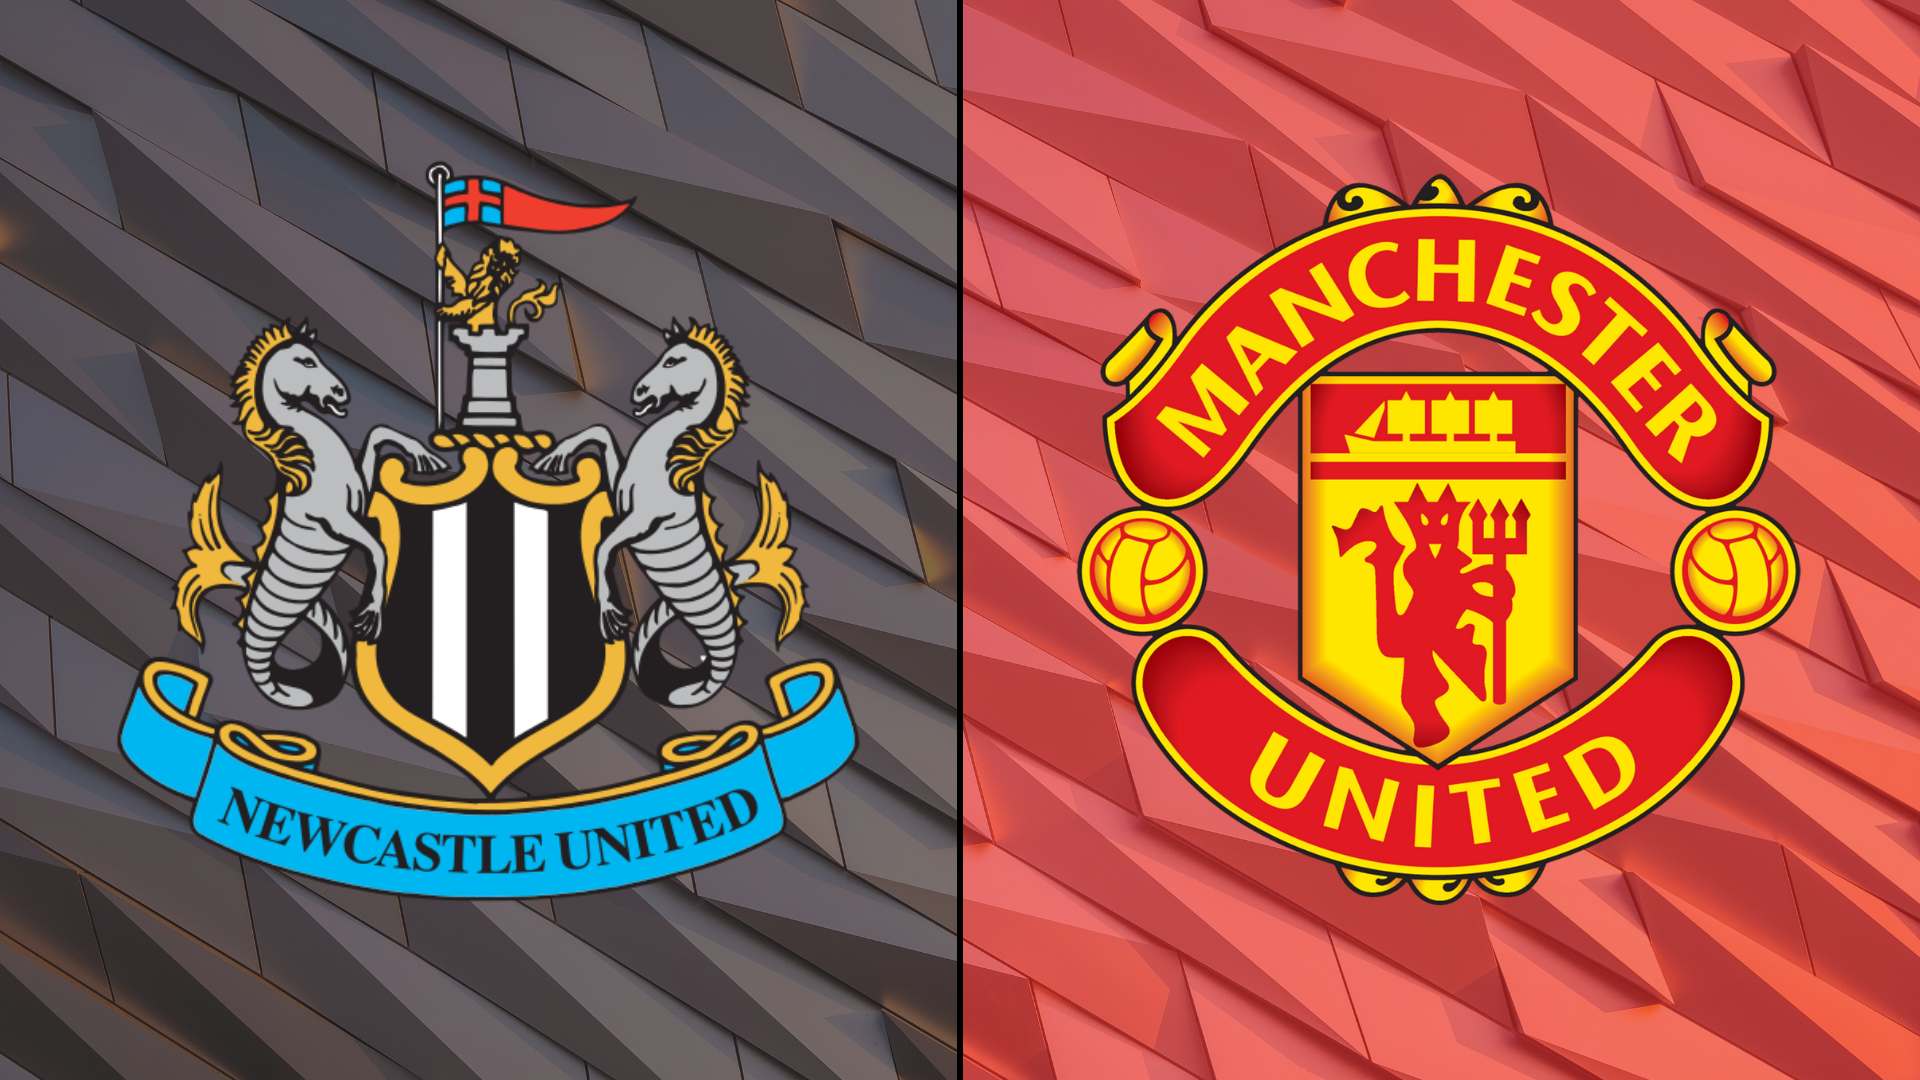 Manchester united - newcastle